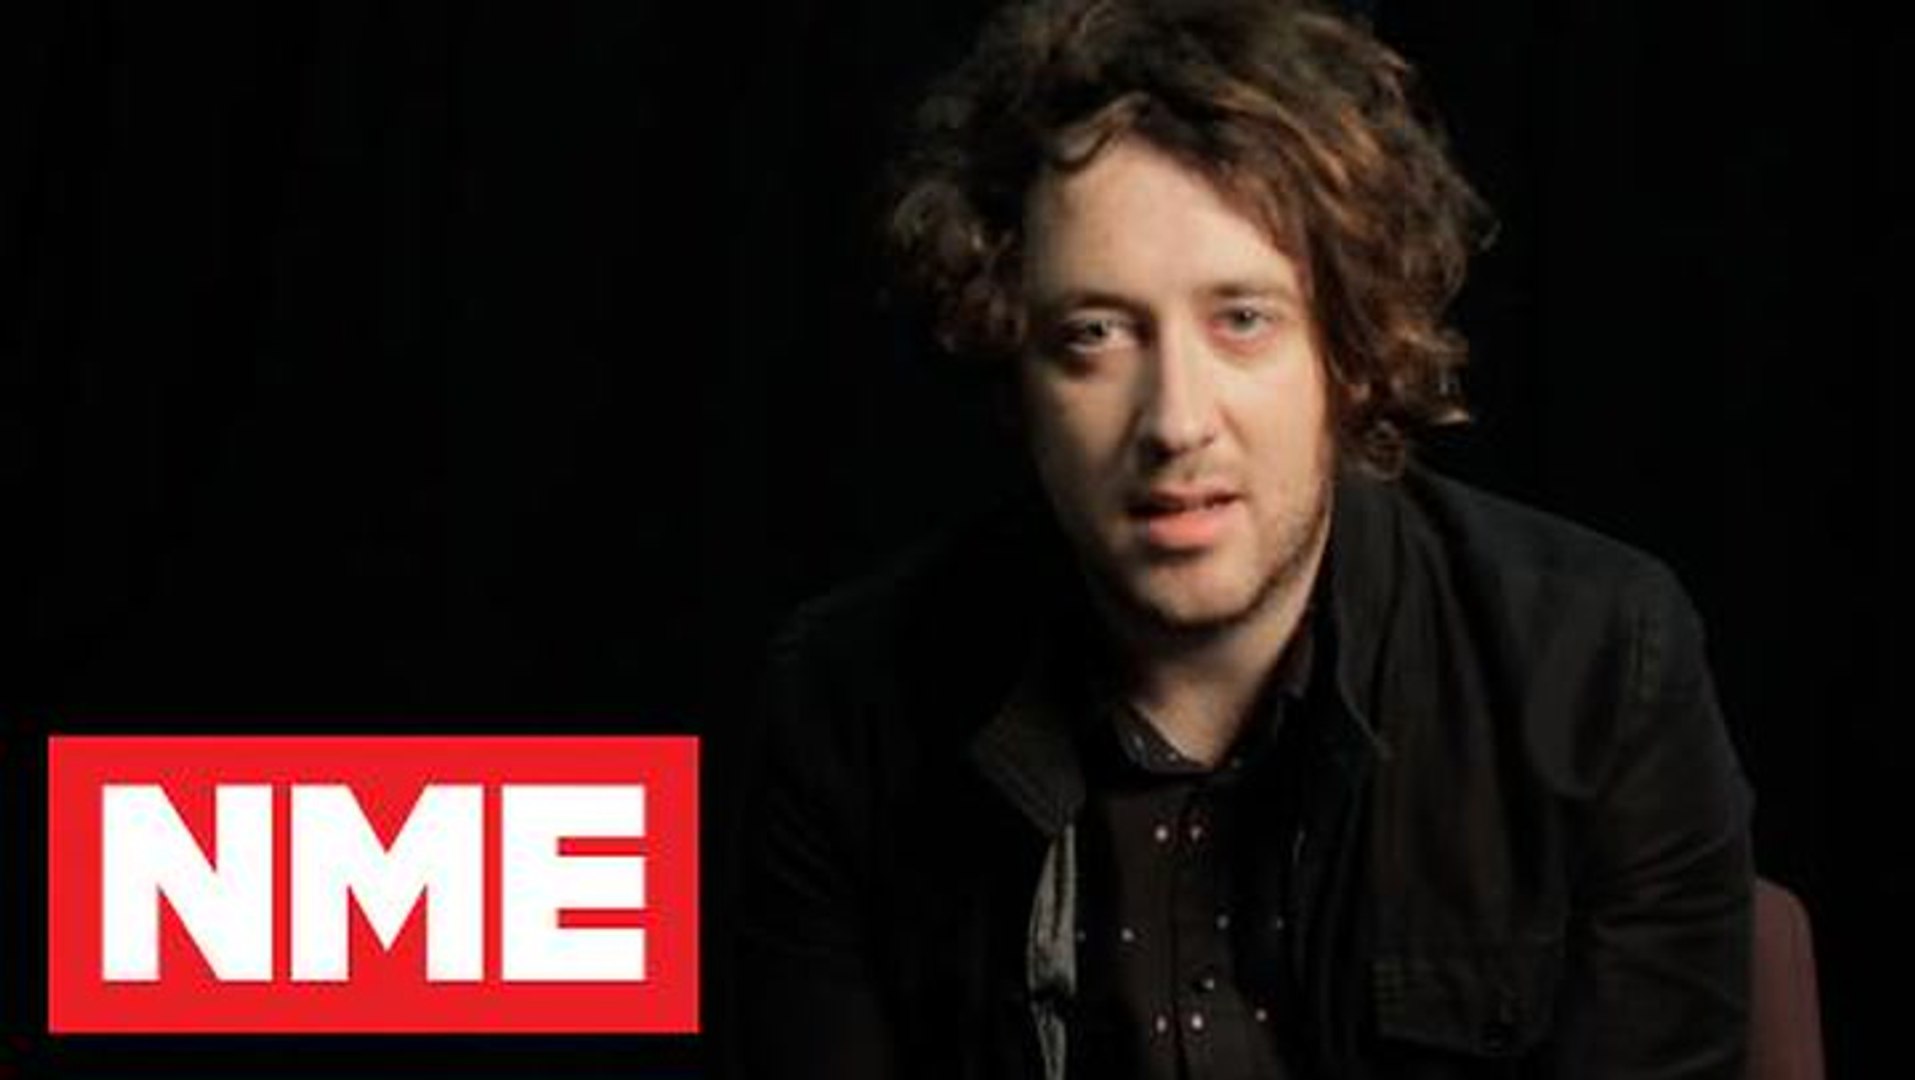 The Wombats On New Album Glitterbug: 'There Are More Sexy Vibes'